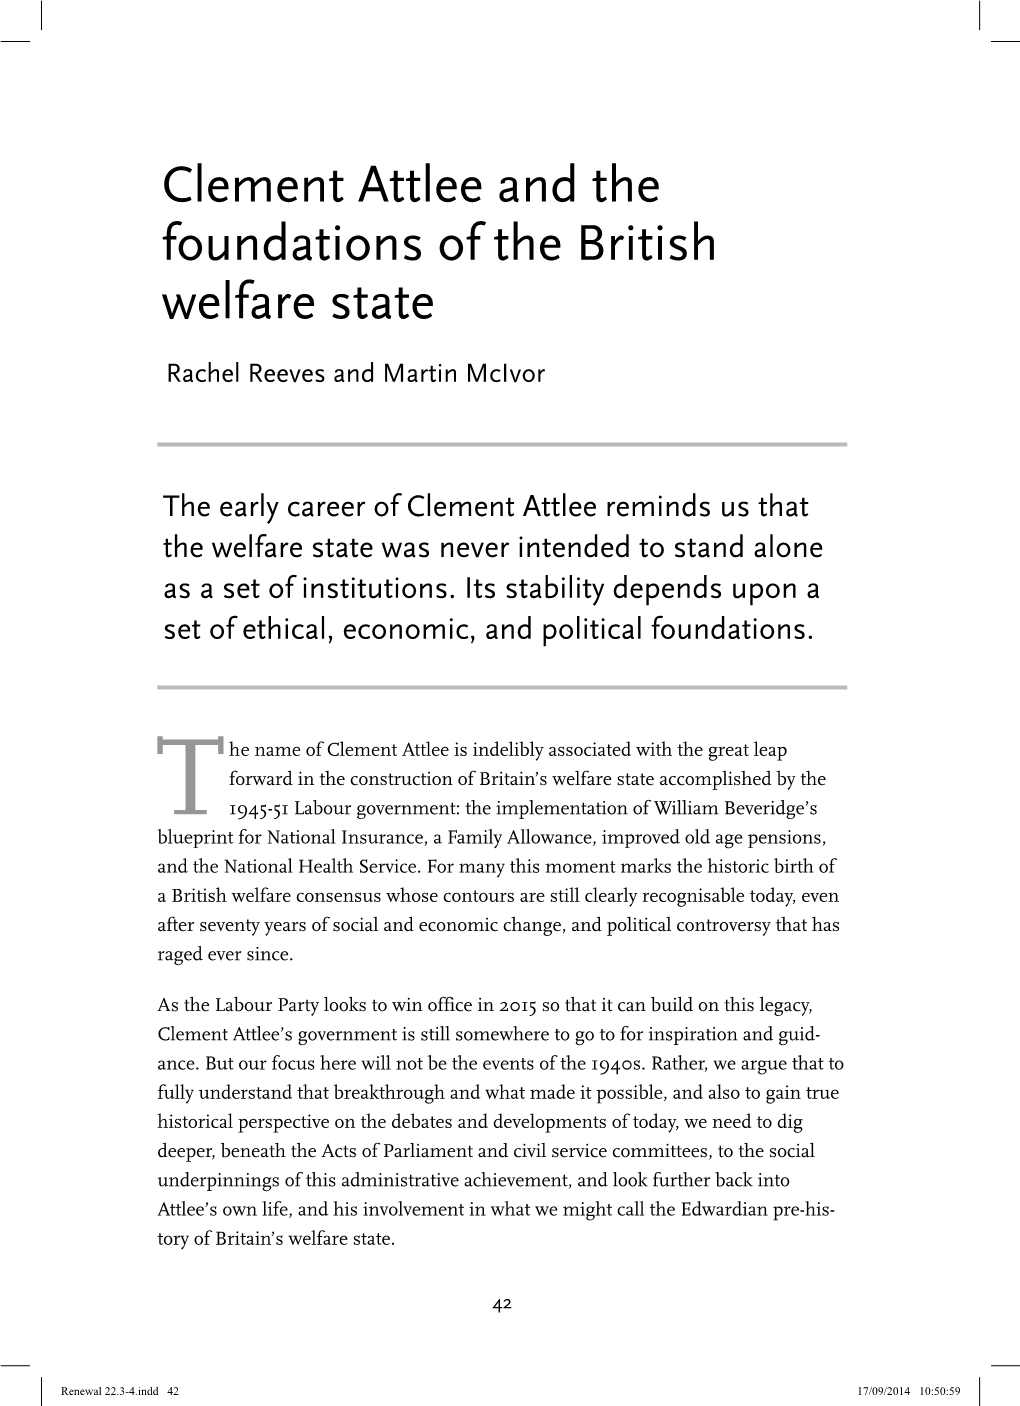 Rachel Reeves and Martin Mcivor, Clement Attlee and the Foundations